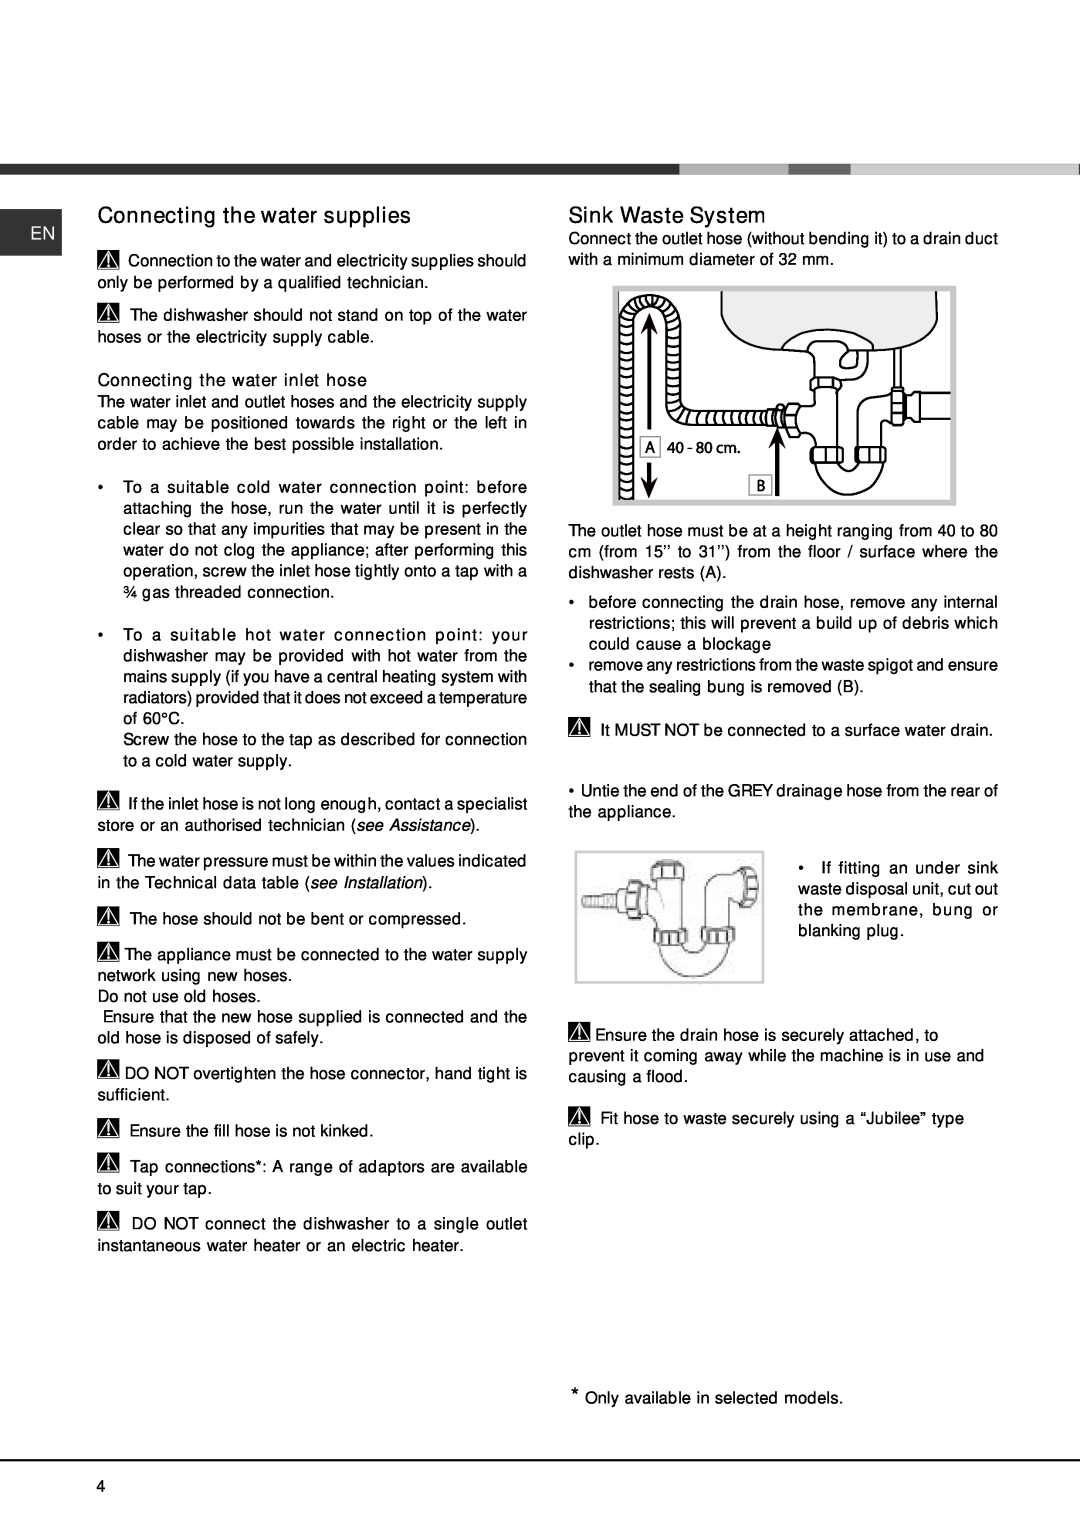 Hotpoint SDUD 1200 manual Connecting the water supplies, Sink Waste System, Connecting the water inlet hose 